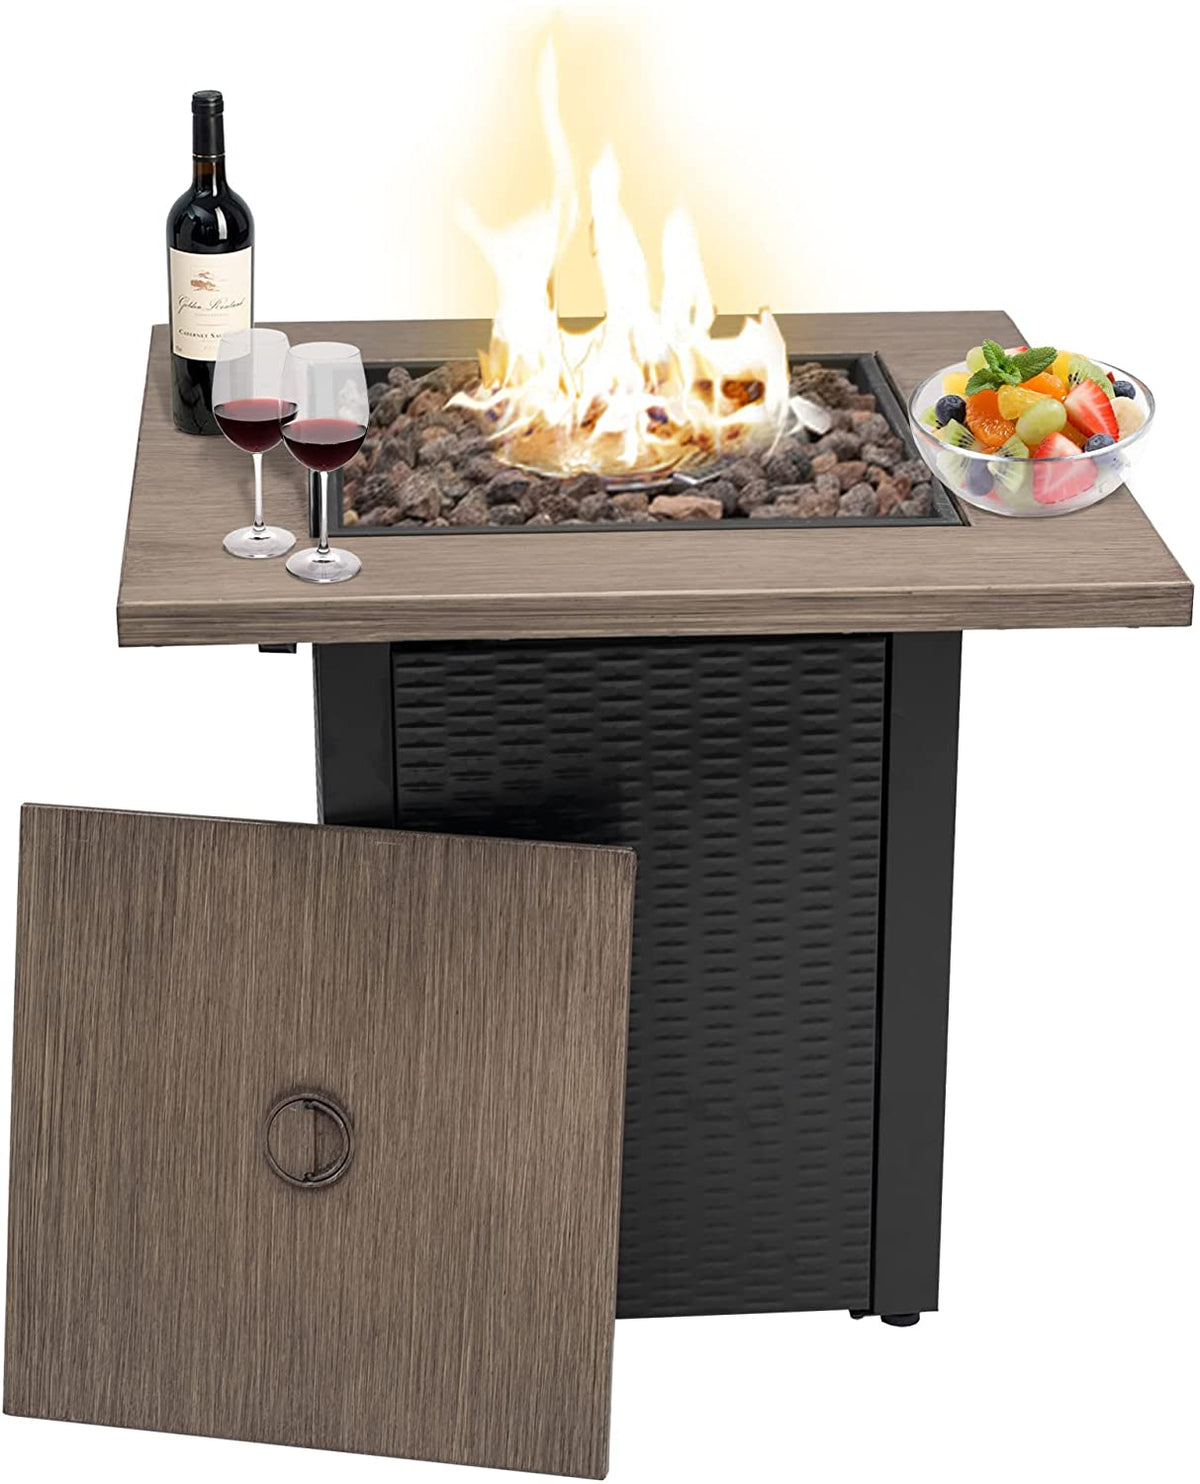 Rattanyard Square Fire Pit Table -Delivery in 3-7 working days